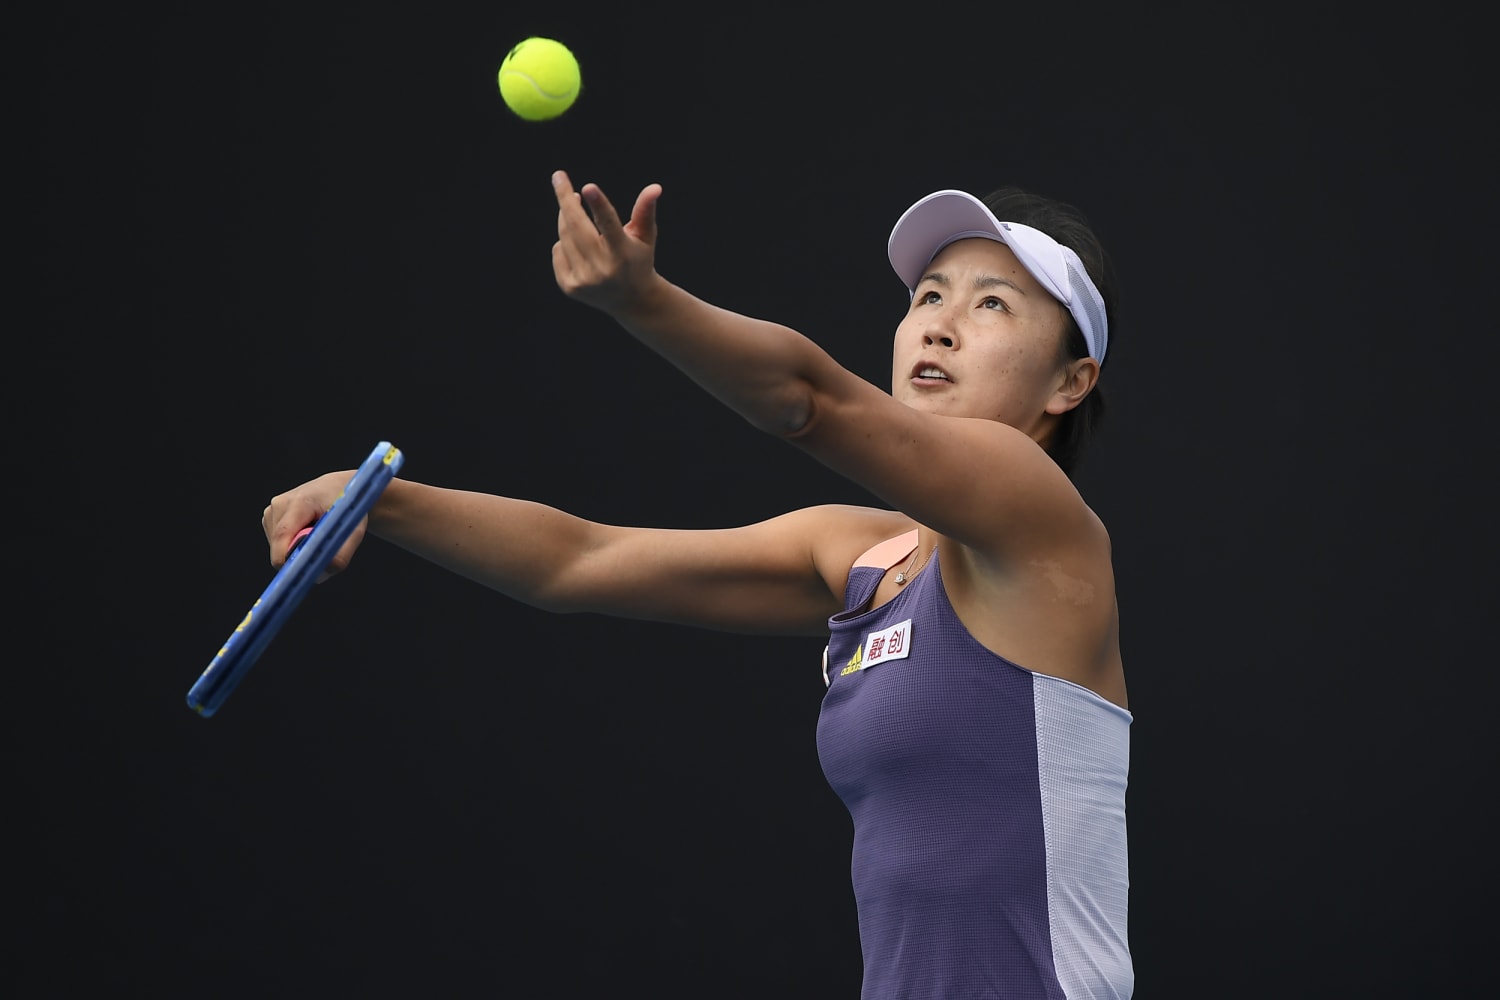 Concerns remain for Chinese tennis star despite telling Olympics chief she’s safe in call